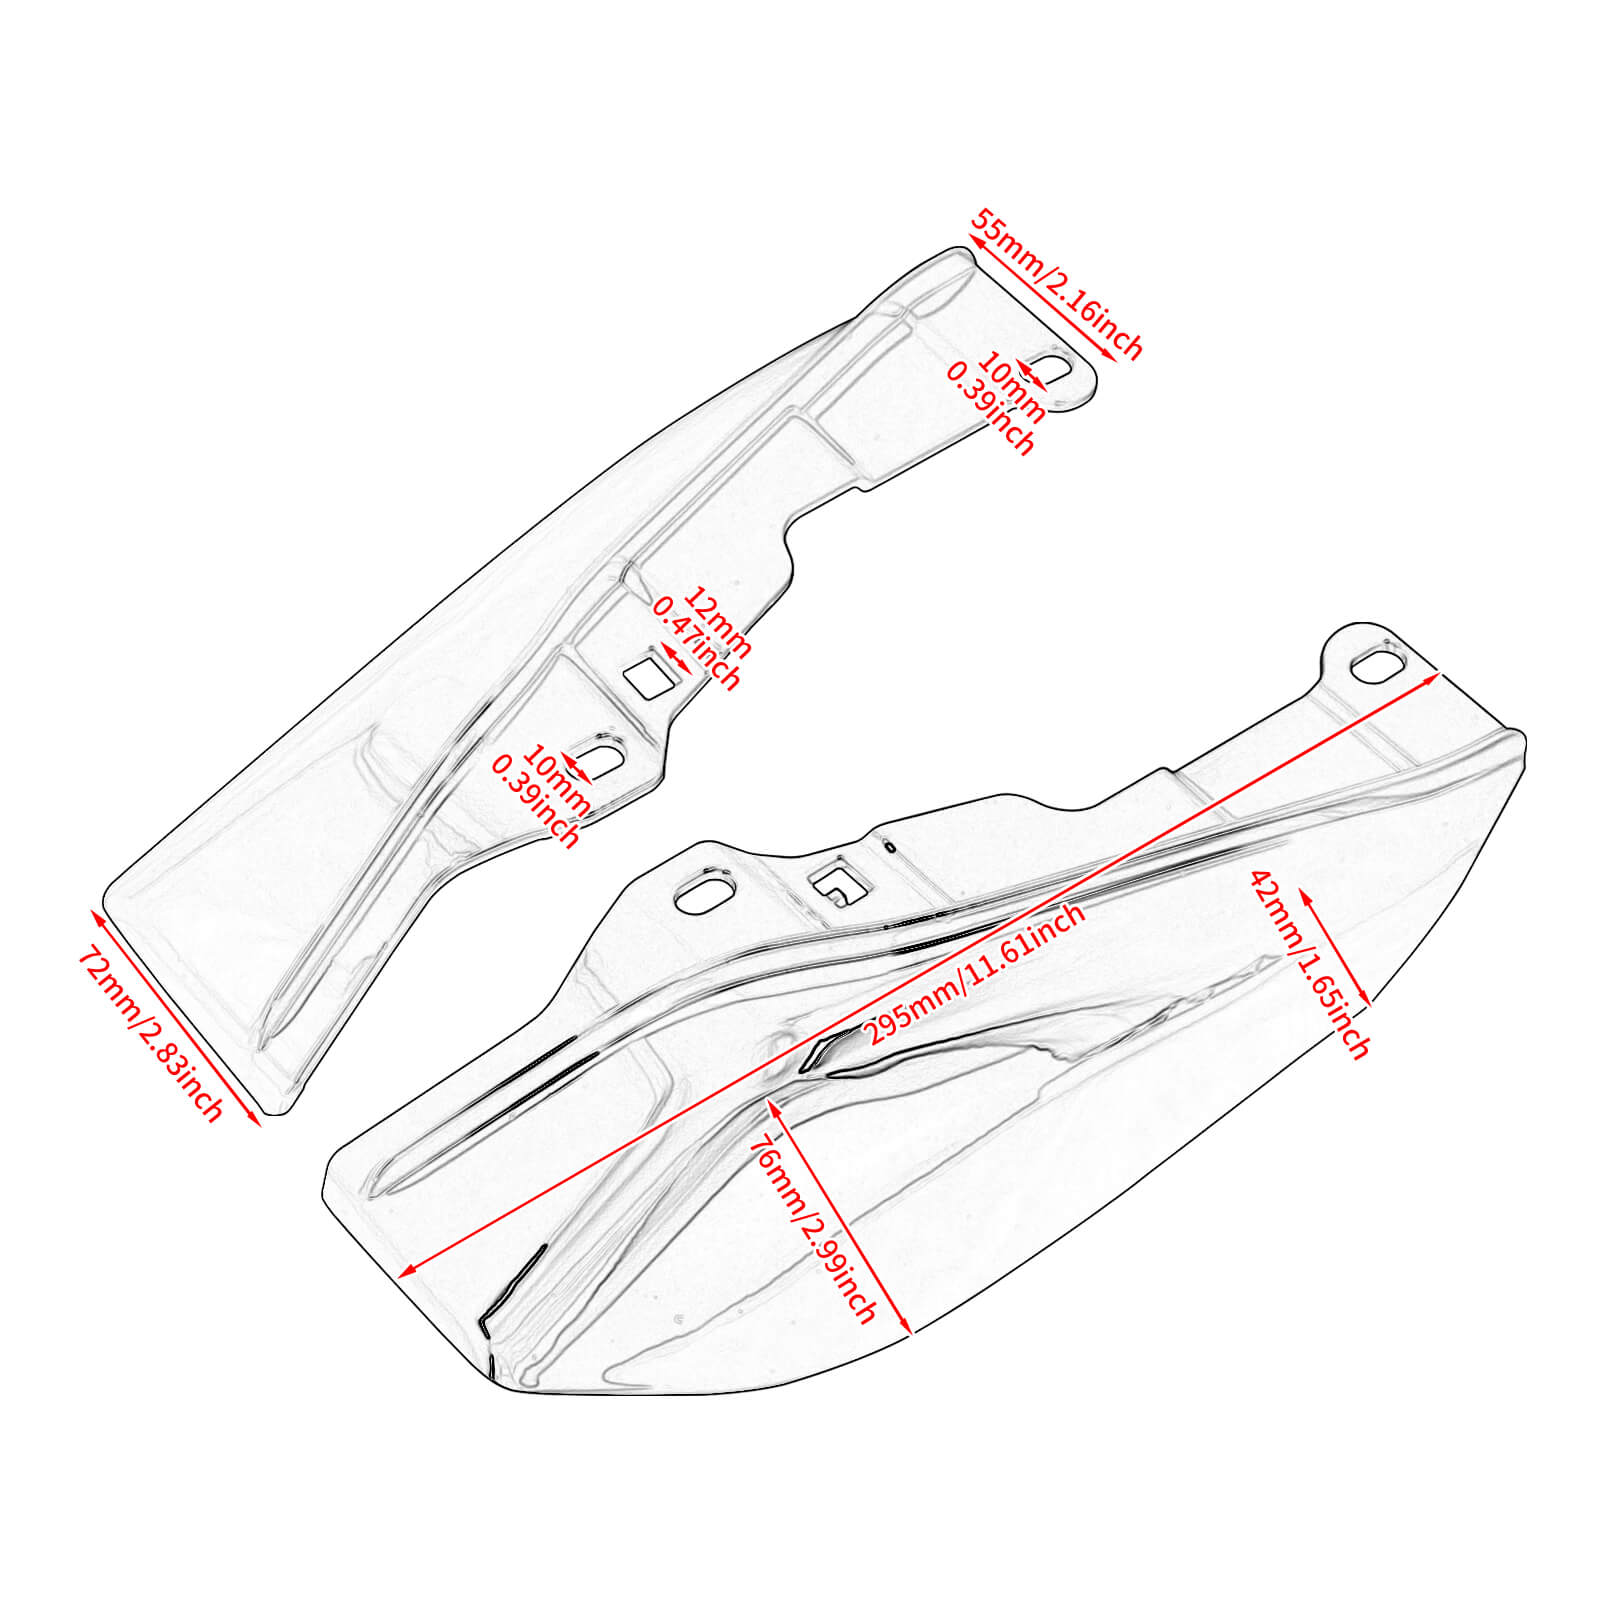 WI000501-mactions-mid-frame-air-deflectors-for-harley-touring-size